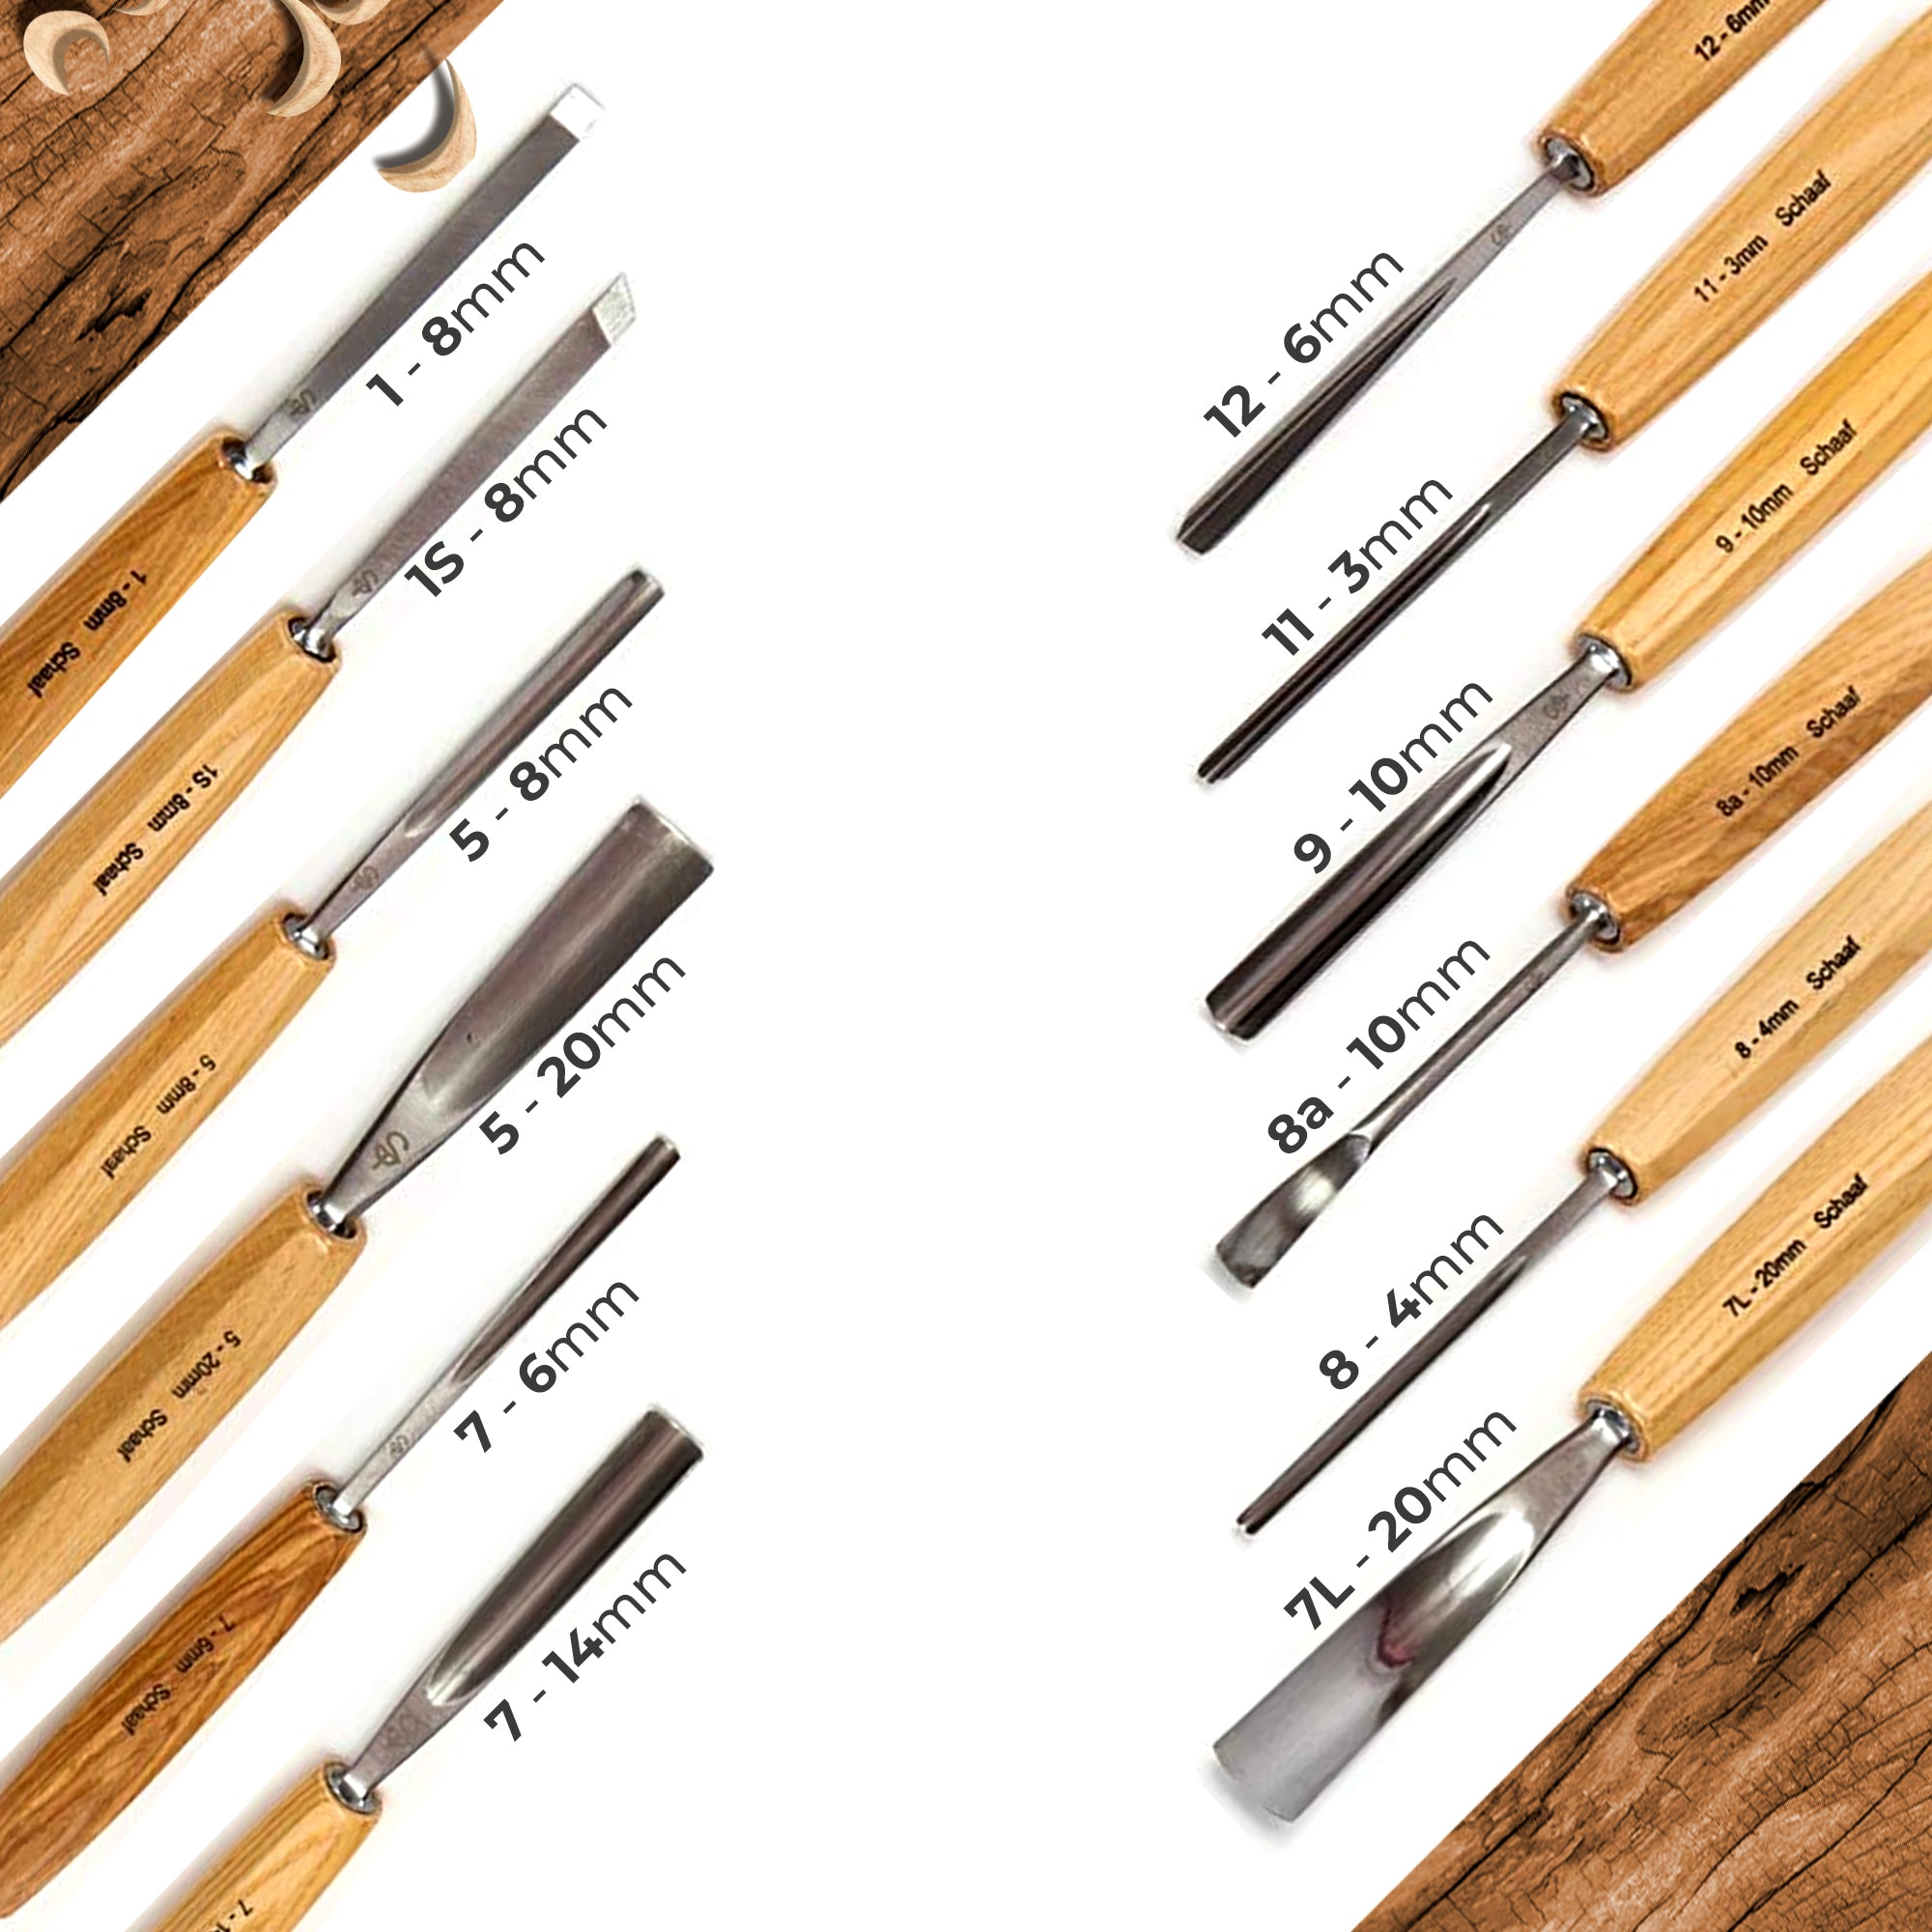 where are schaaf wood carving tools made?